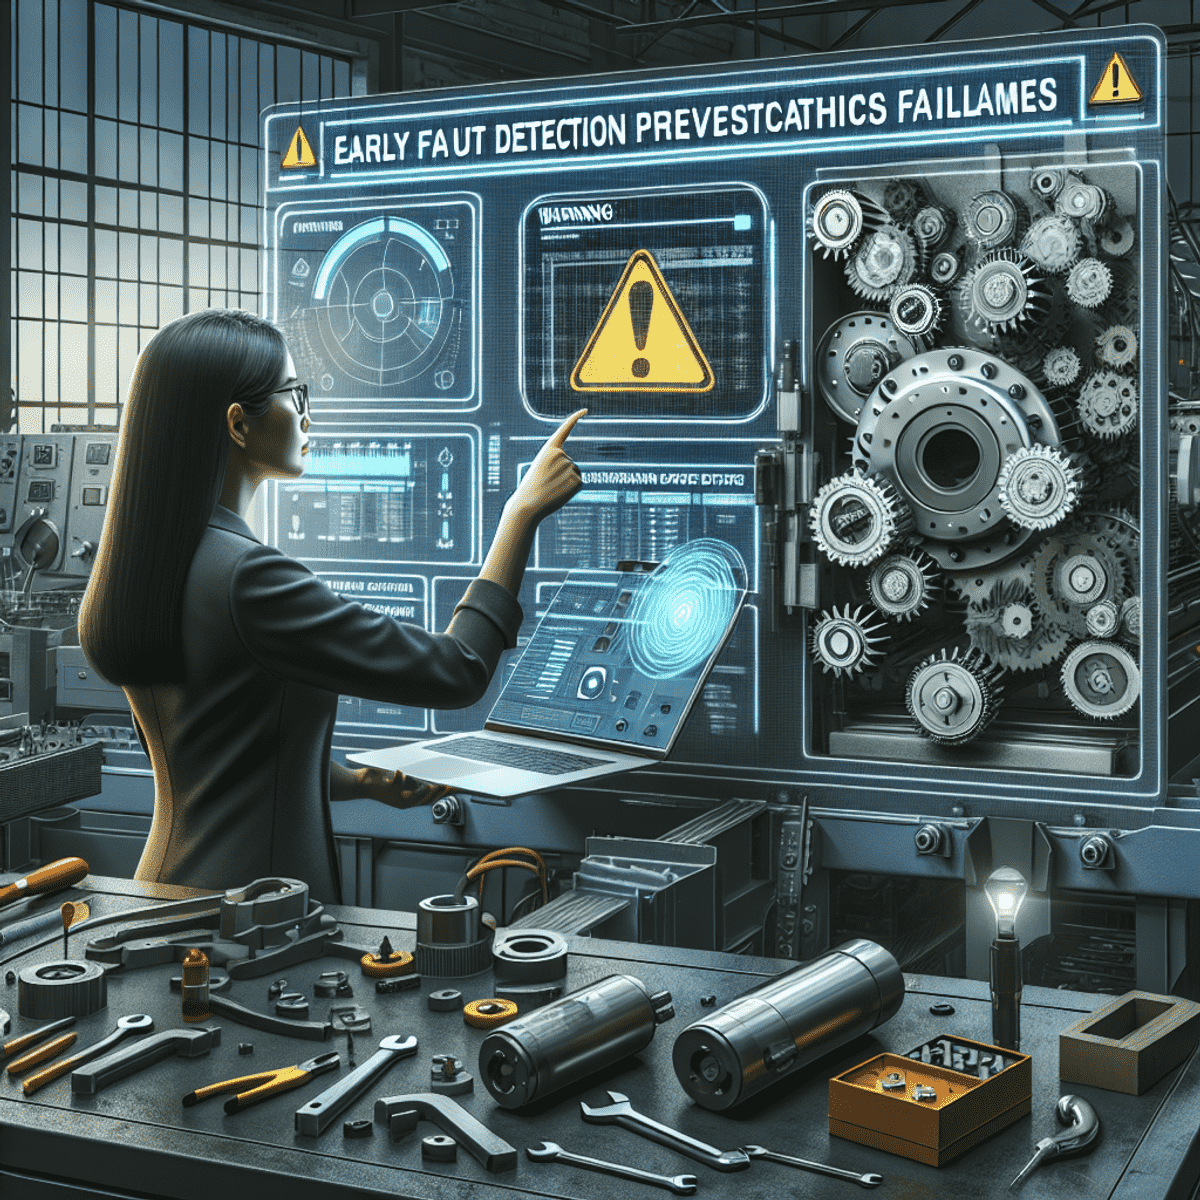 Preventing Catastrophic Failures through Early Fault Detection